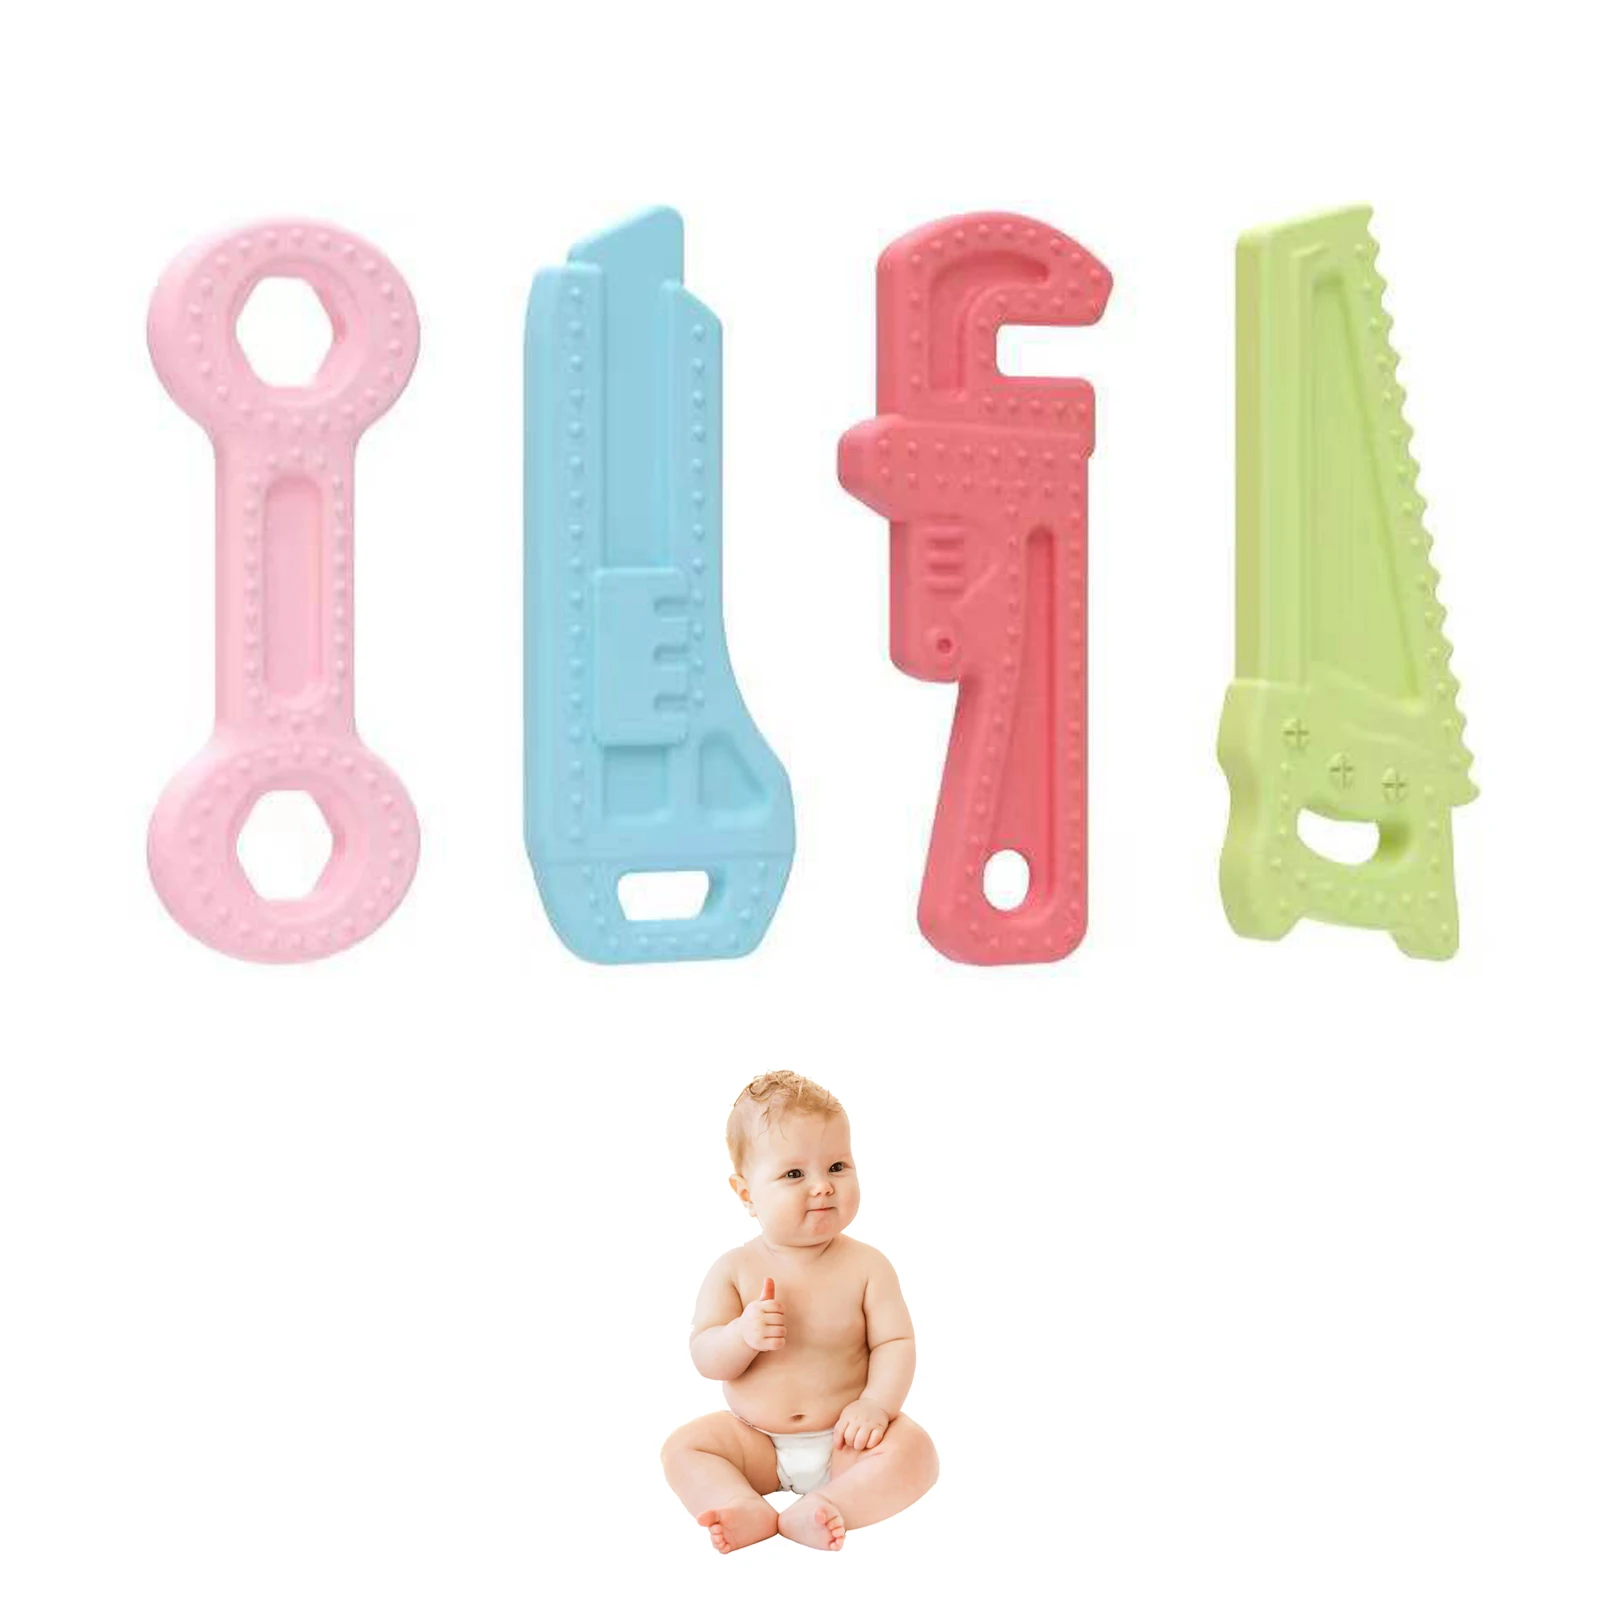 

4 Pack Baby Teething Toys Silicone Baby Molar Teether Chew Toys Soothe Babies Gums Set 0-6 Months 6-12 Months